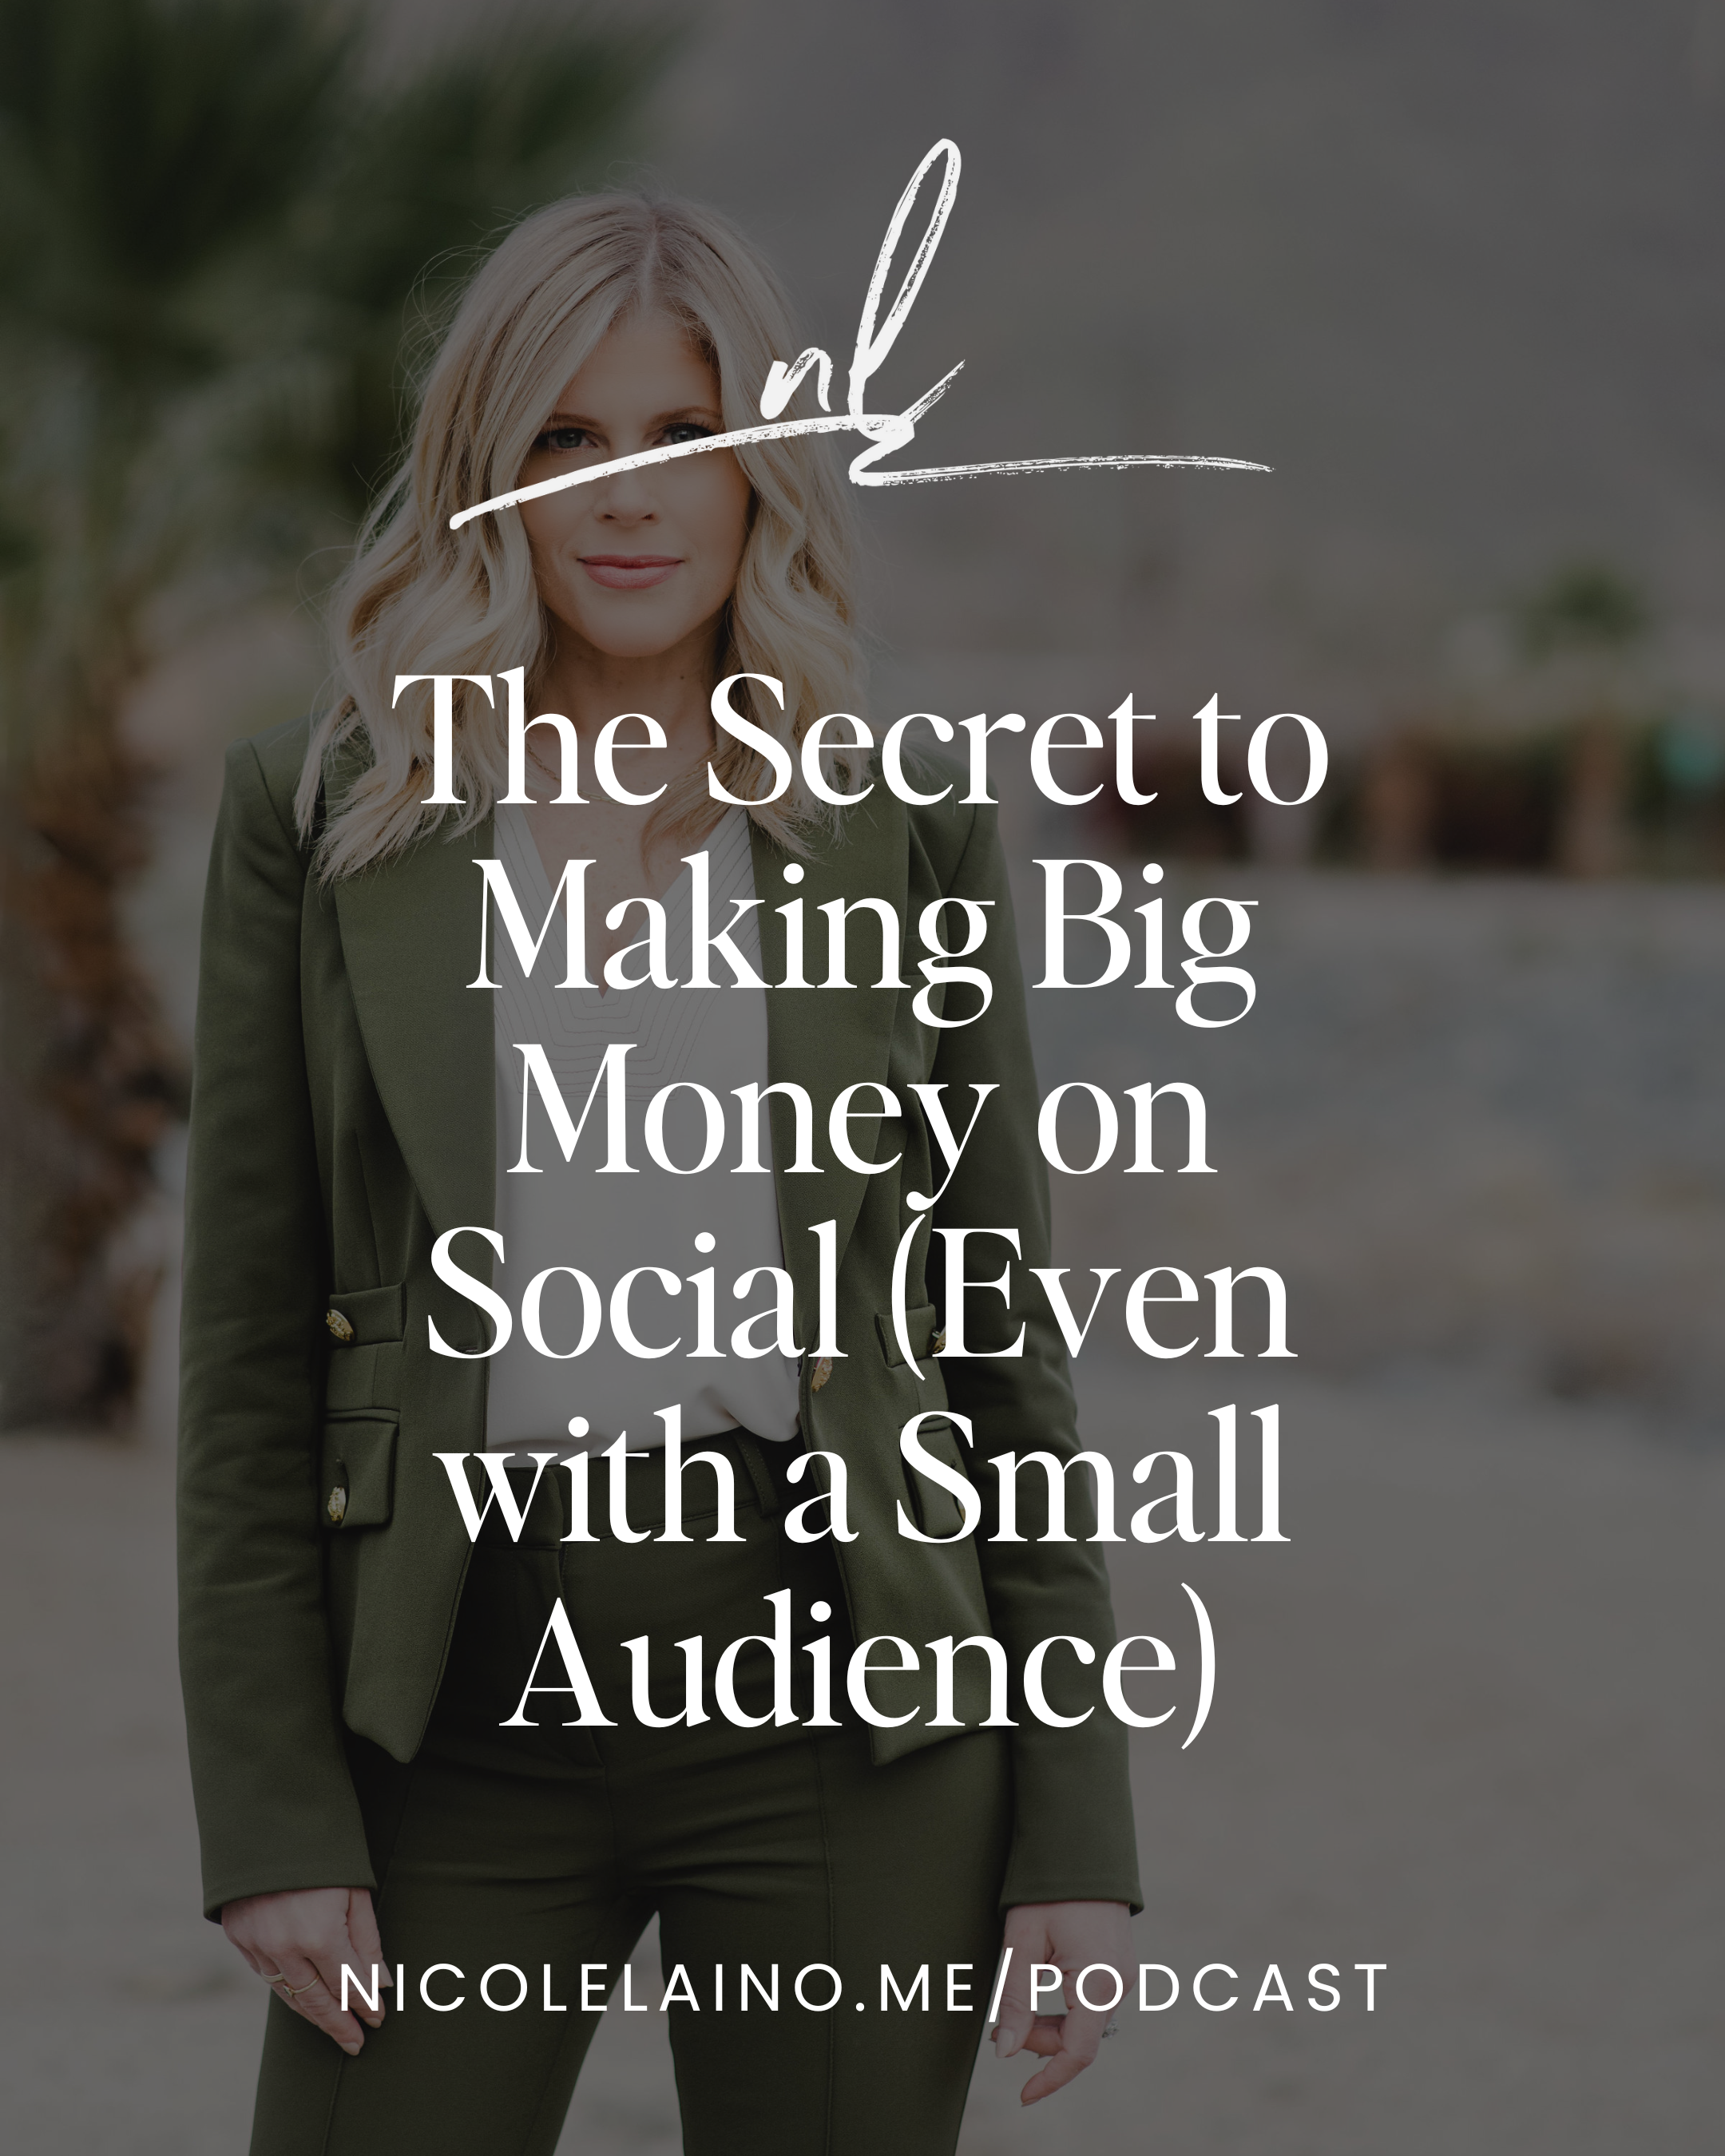 The Secret to Making Big Money on Social (Even with a Small Audience)